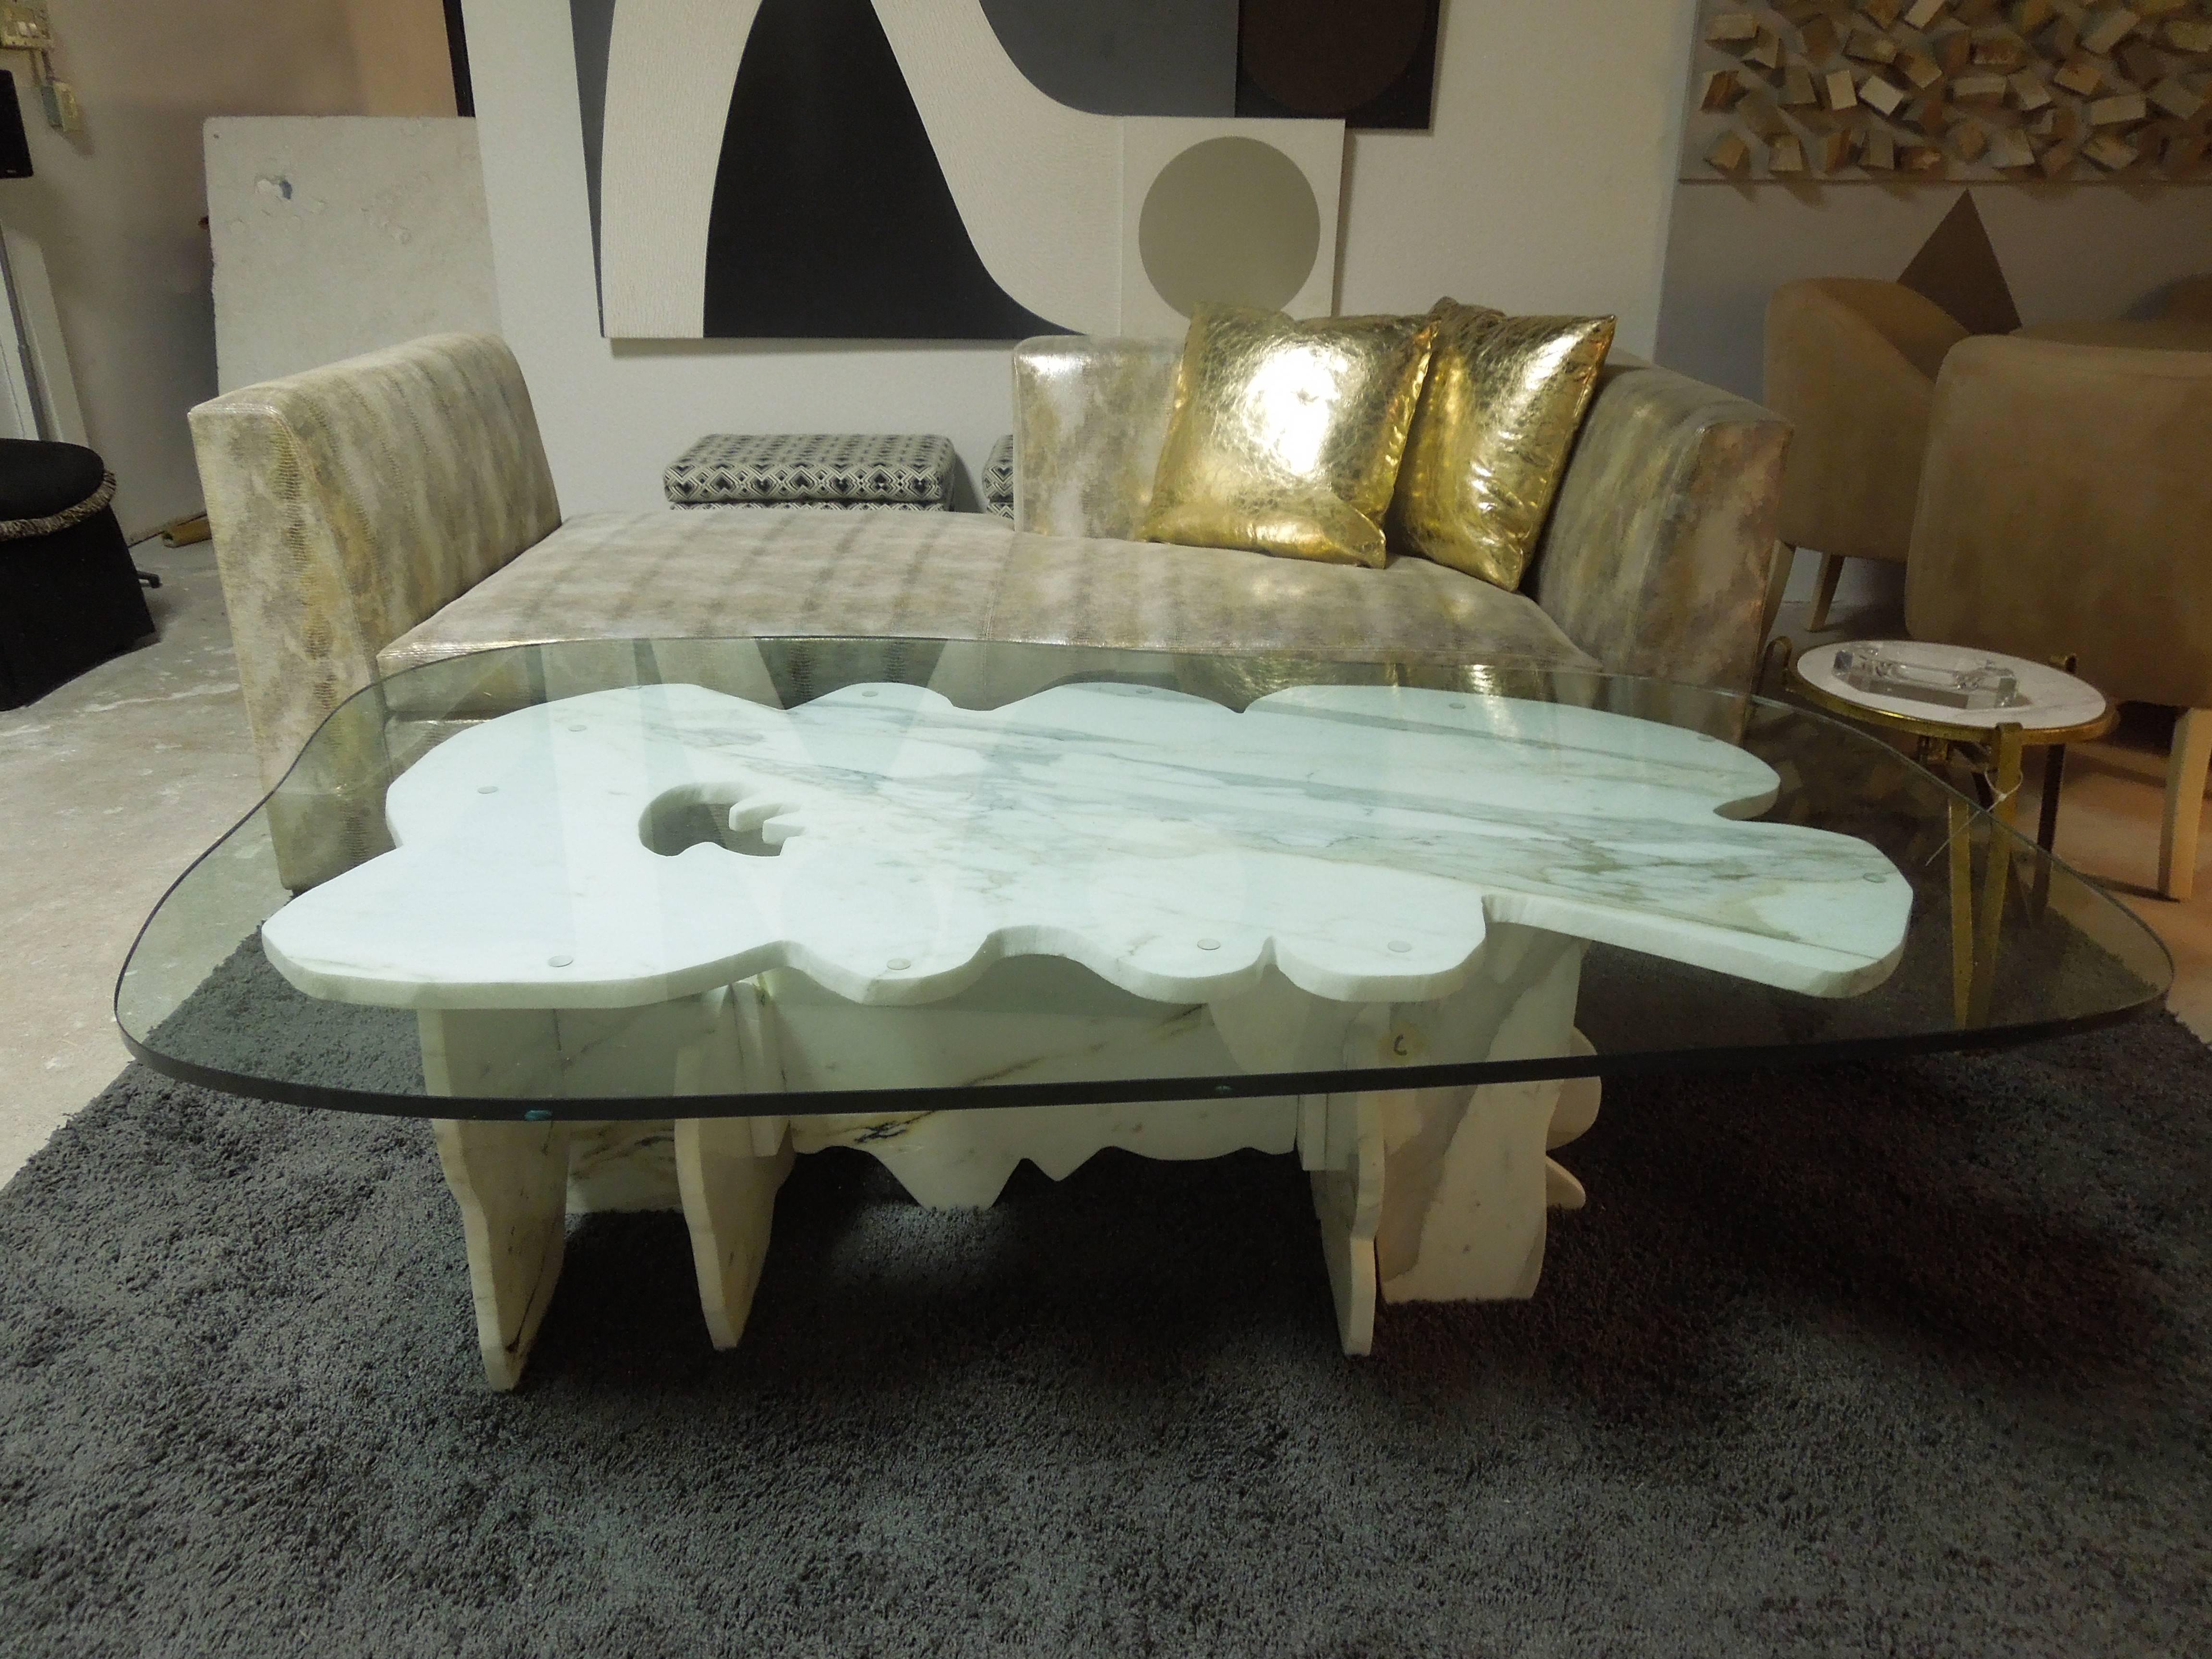 A 20th Century Masters Coffee table designed by renowned Artist/Sculptor Abbott Pattison (1916-1999). Hand cut puzzle pieces of carrara marble imported by the artist in the early 60's from Florence, Italy, interlock to form the intricate bases in